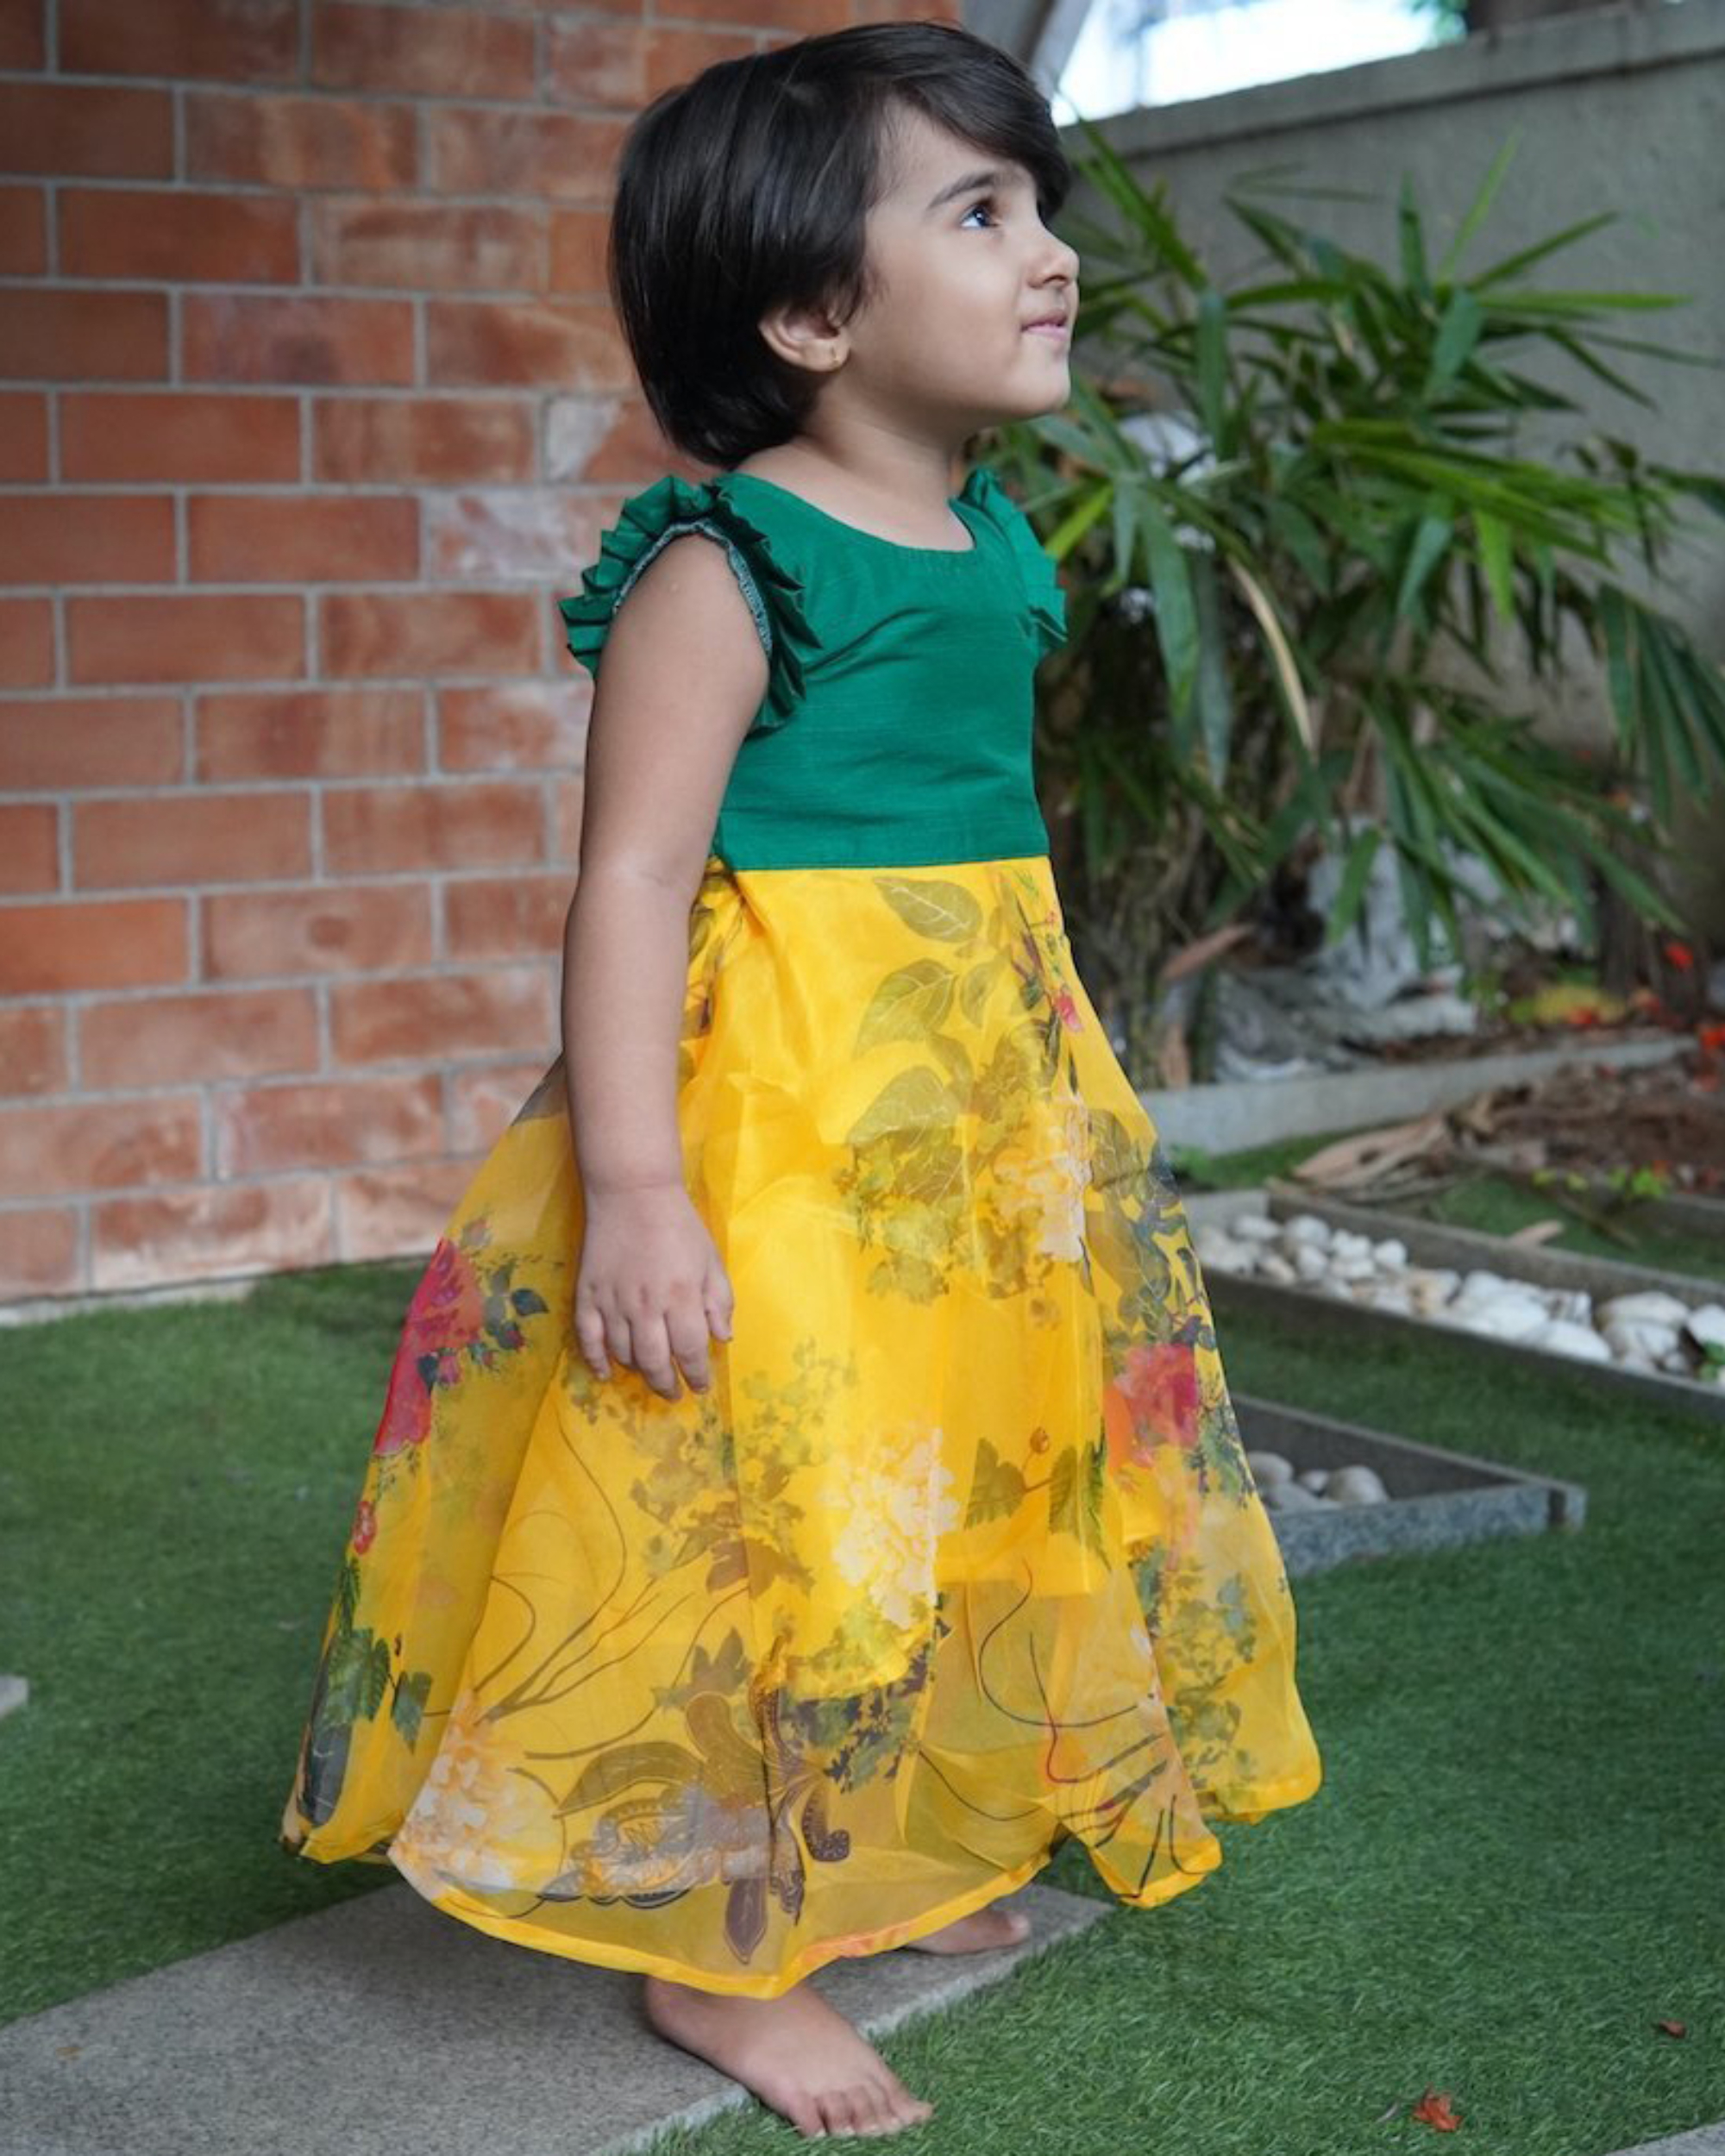 10 Marvelous Long Frock Designs for Your Princess